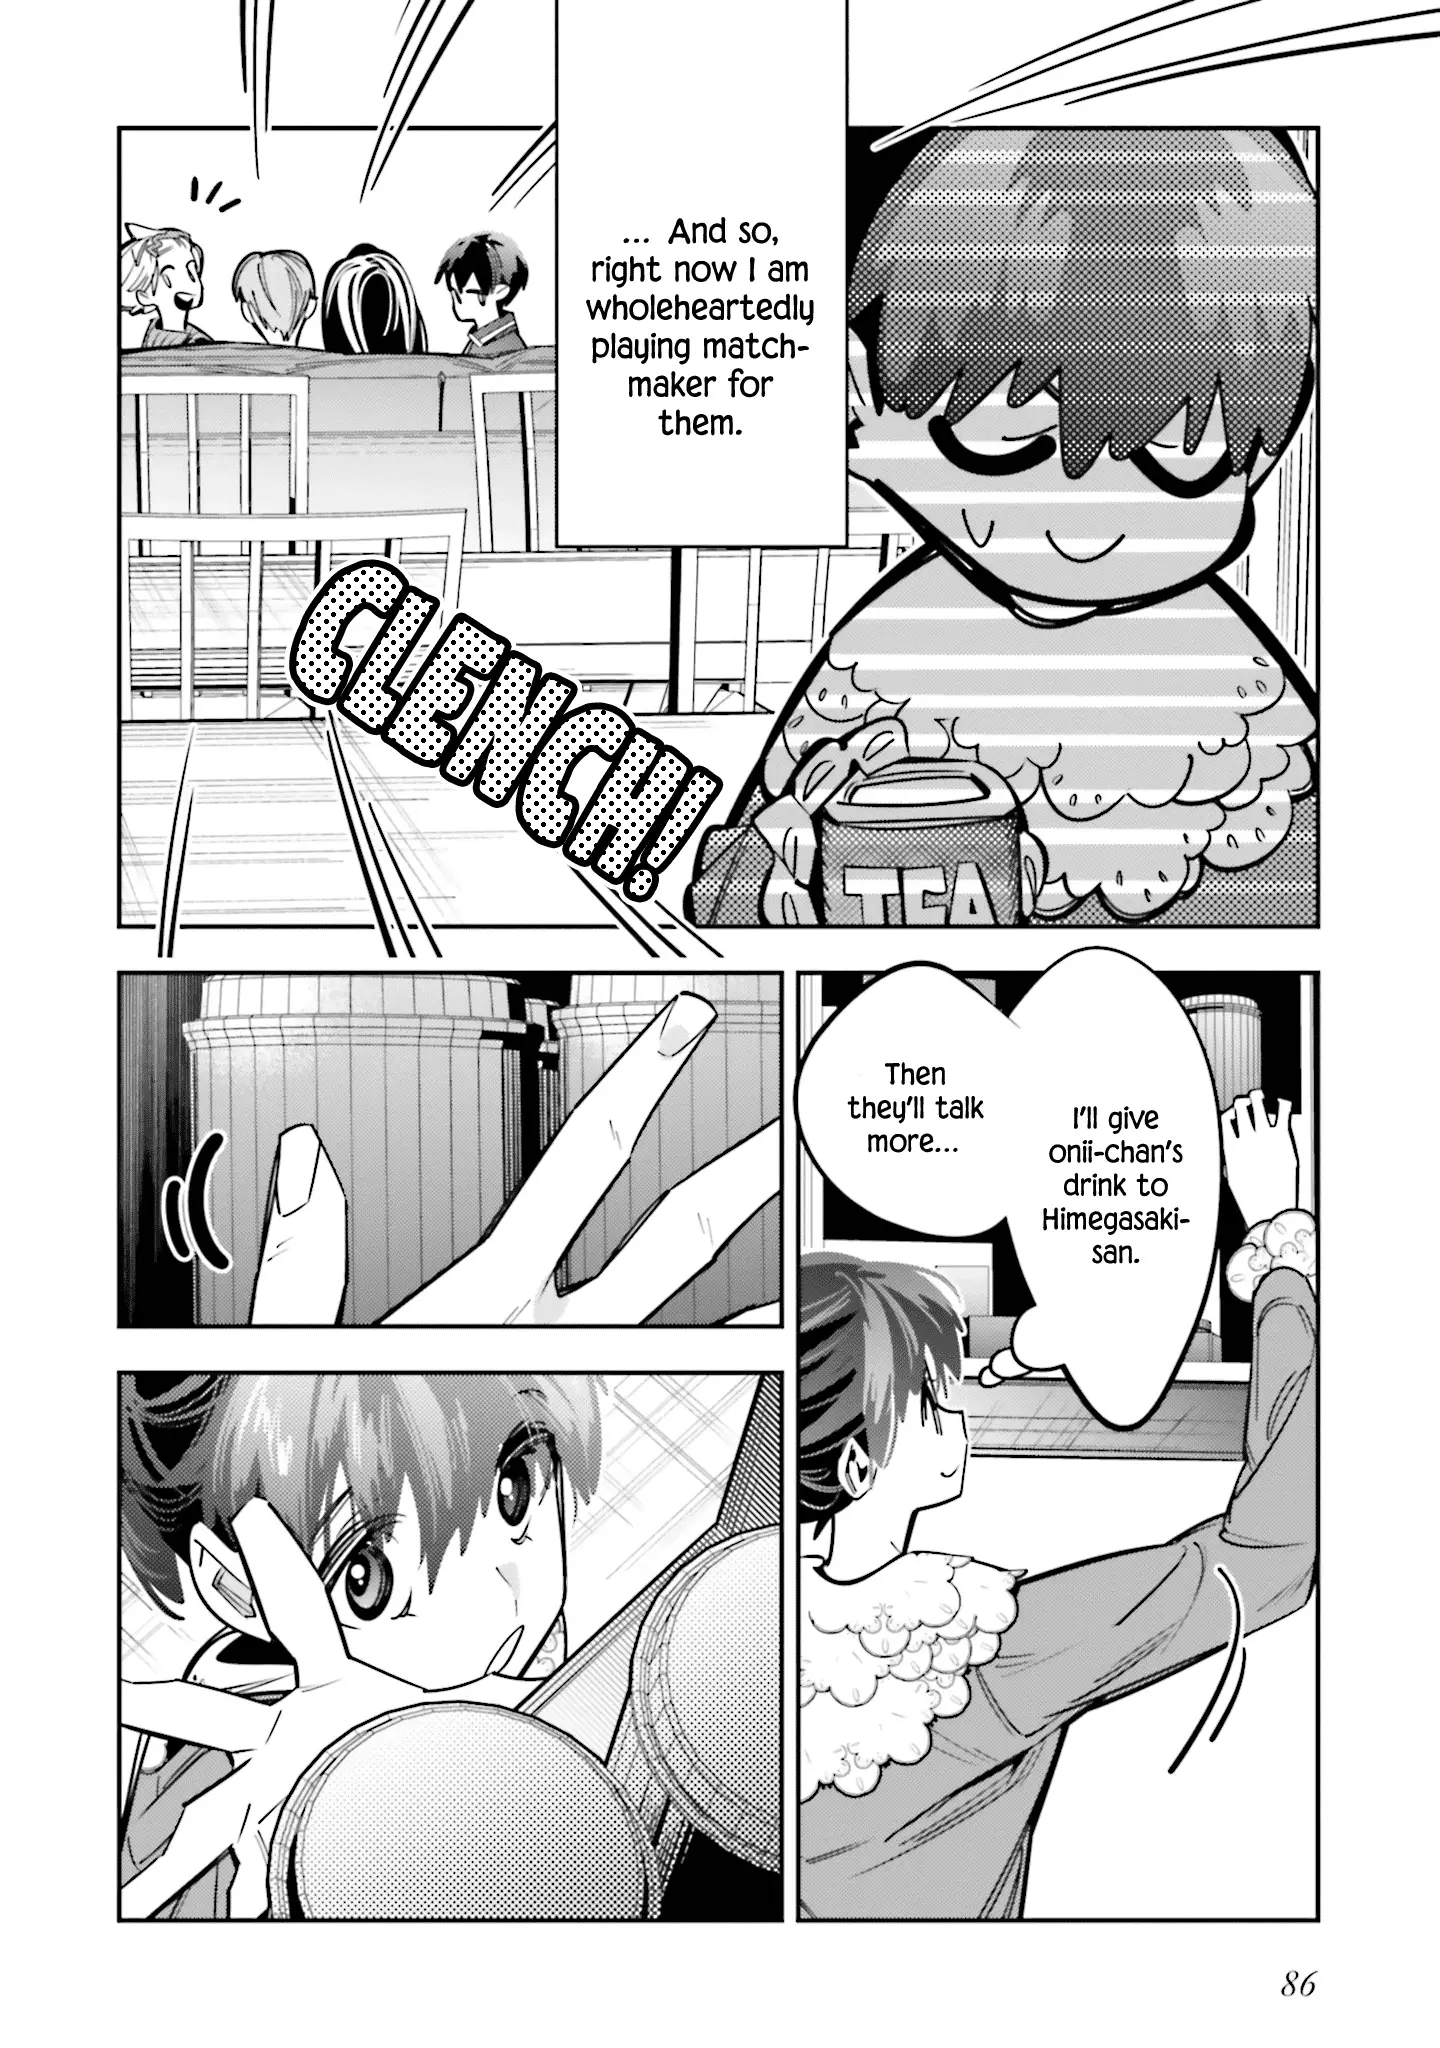 I Reincarnated As The Little Sister Of A Death Game Manga's Murder Mastermind And Failed - 7 page 16-70f2c1a7